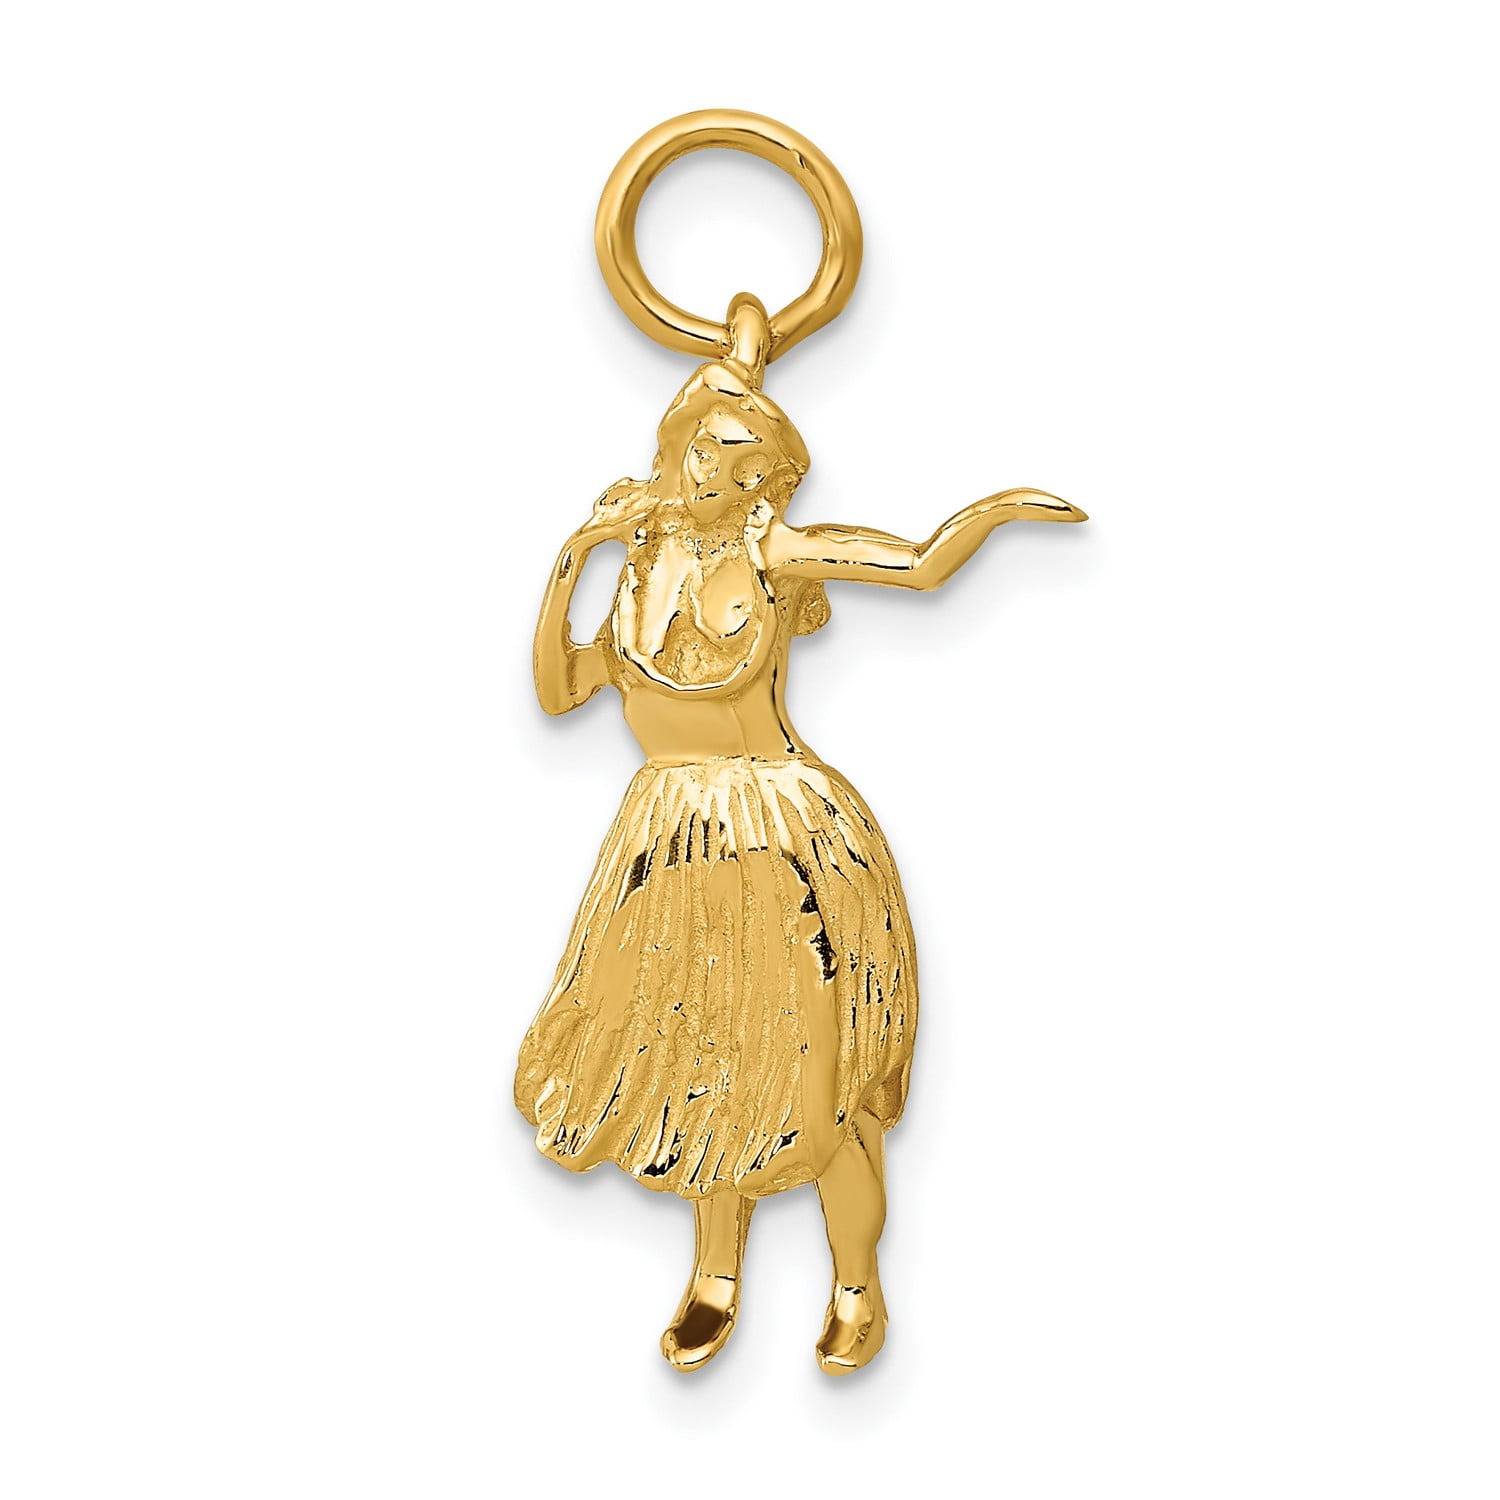 Details about   14K Yellow Gold 3D Hula Dancer Charm Hawaii Jewelry 24mm x 10mm 